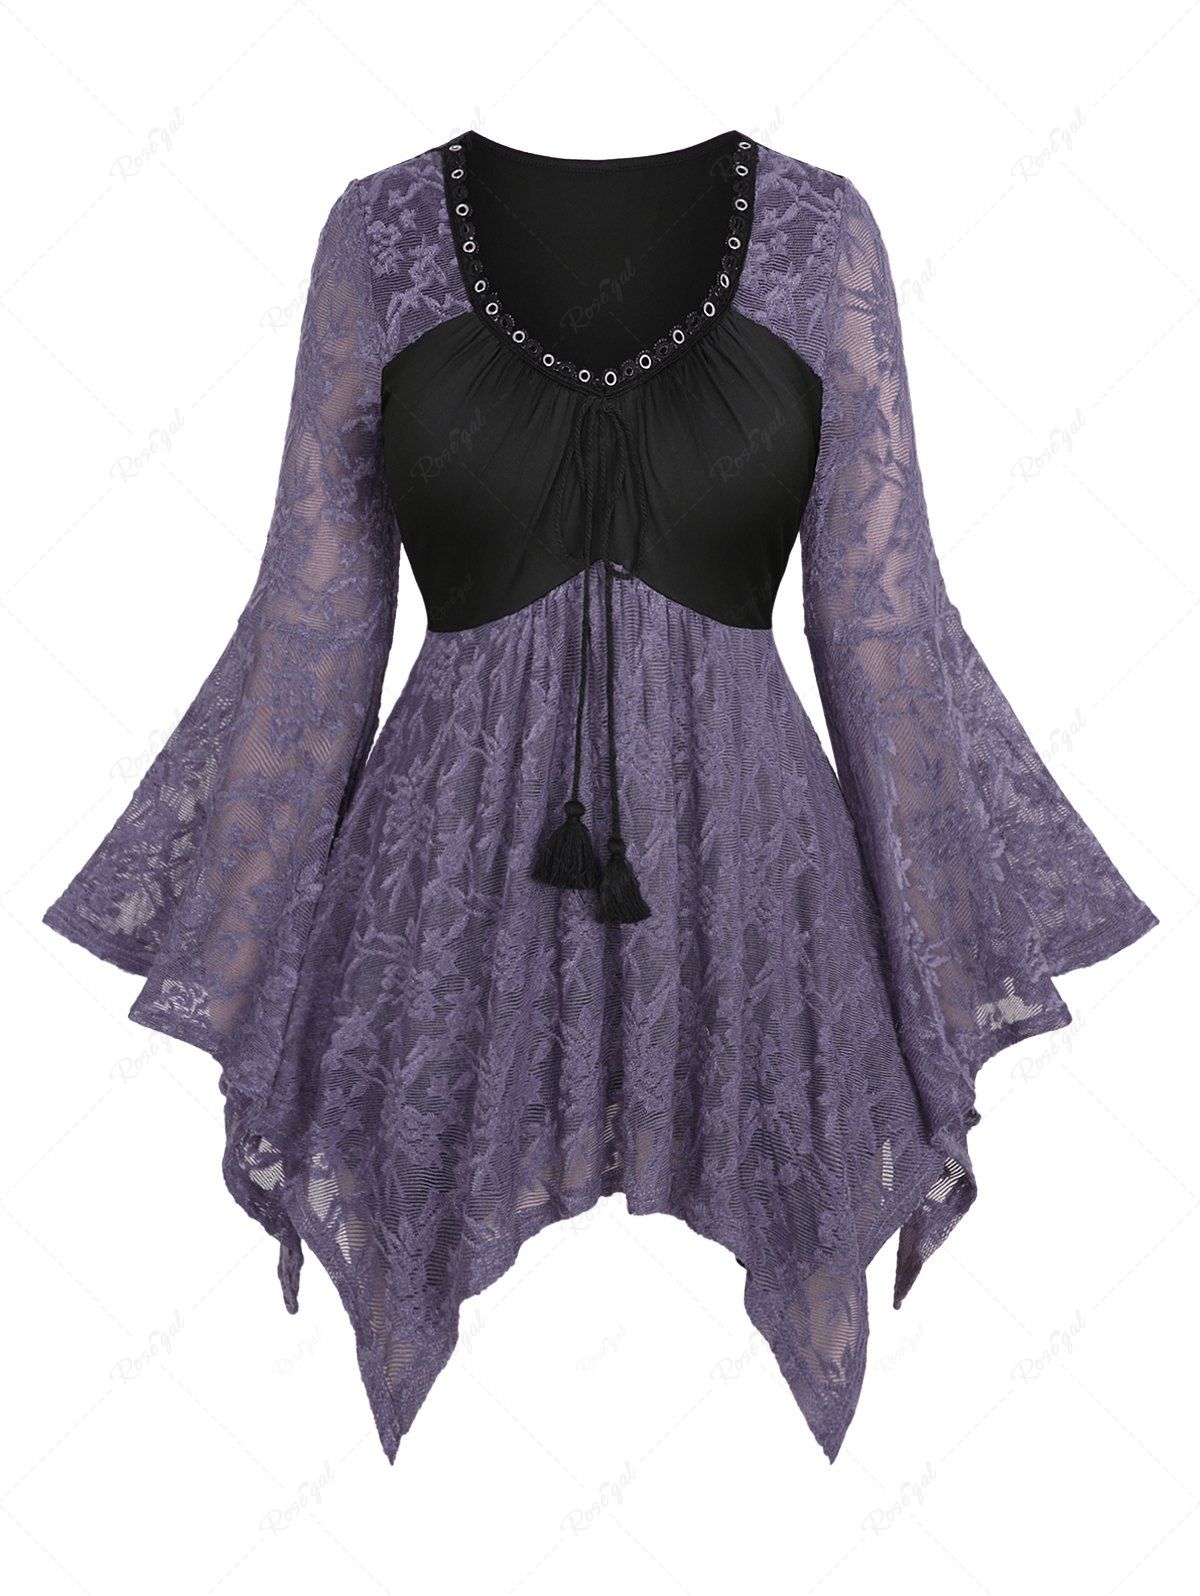 Unique Plus Size Flare Sleeves Uneven Floral Lace Embroidered Ruched Tied Tassel Patchwork Grommet Handkerchief Top  